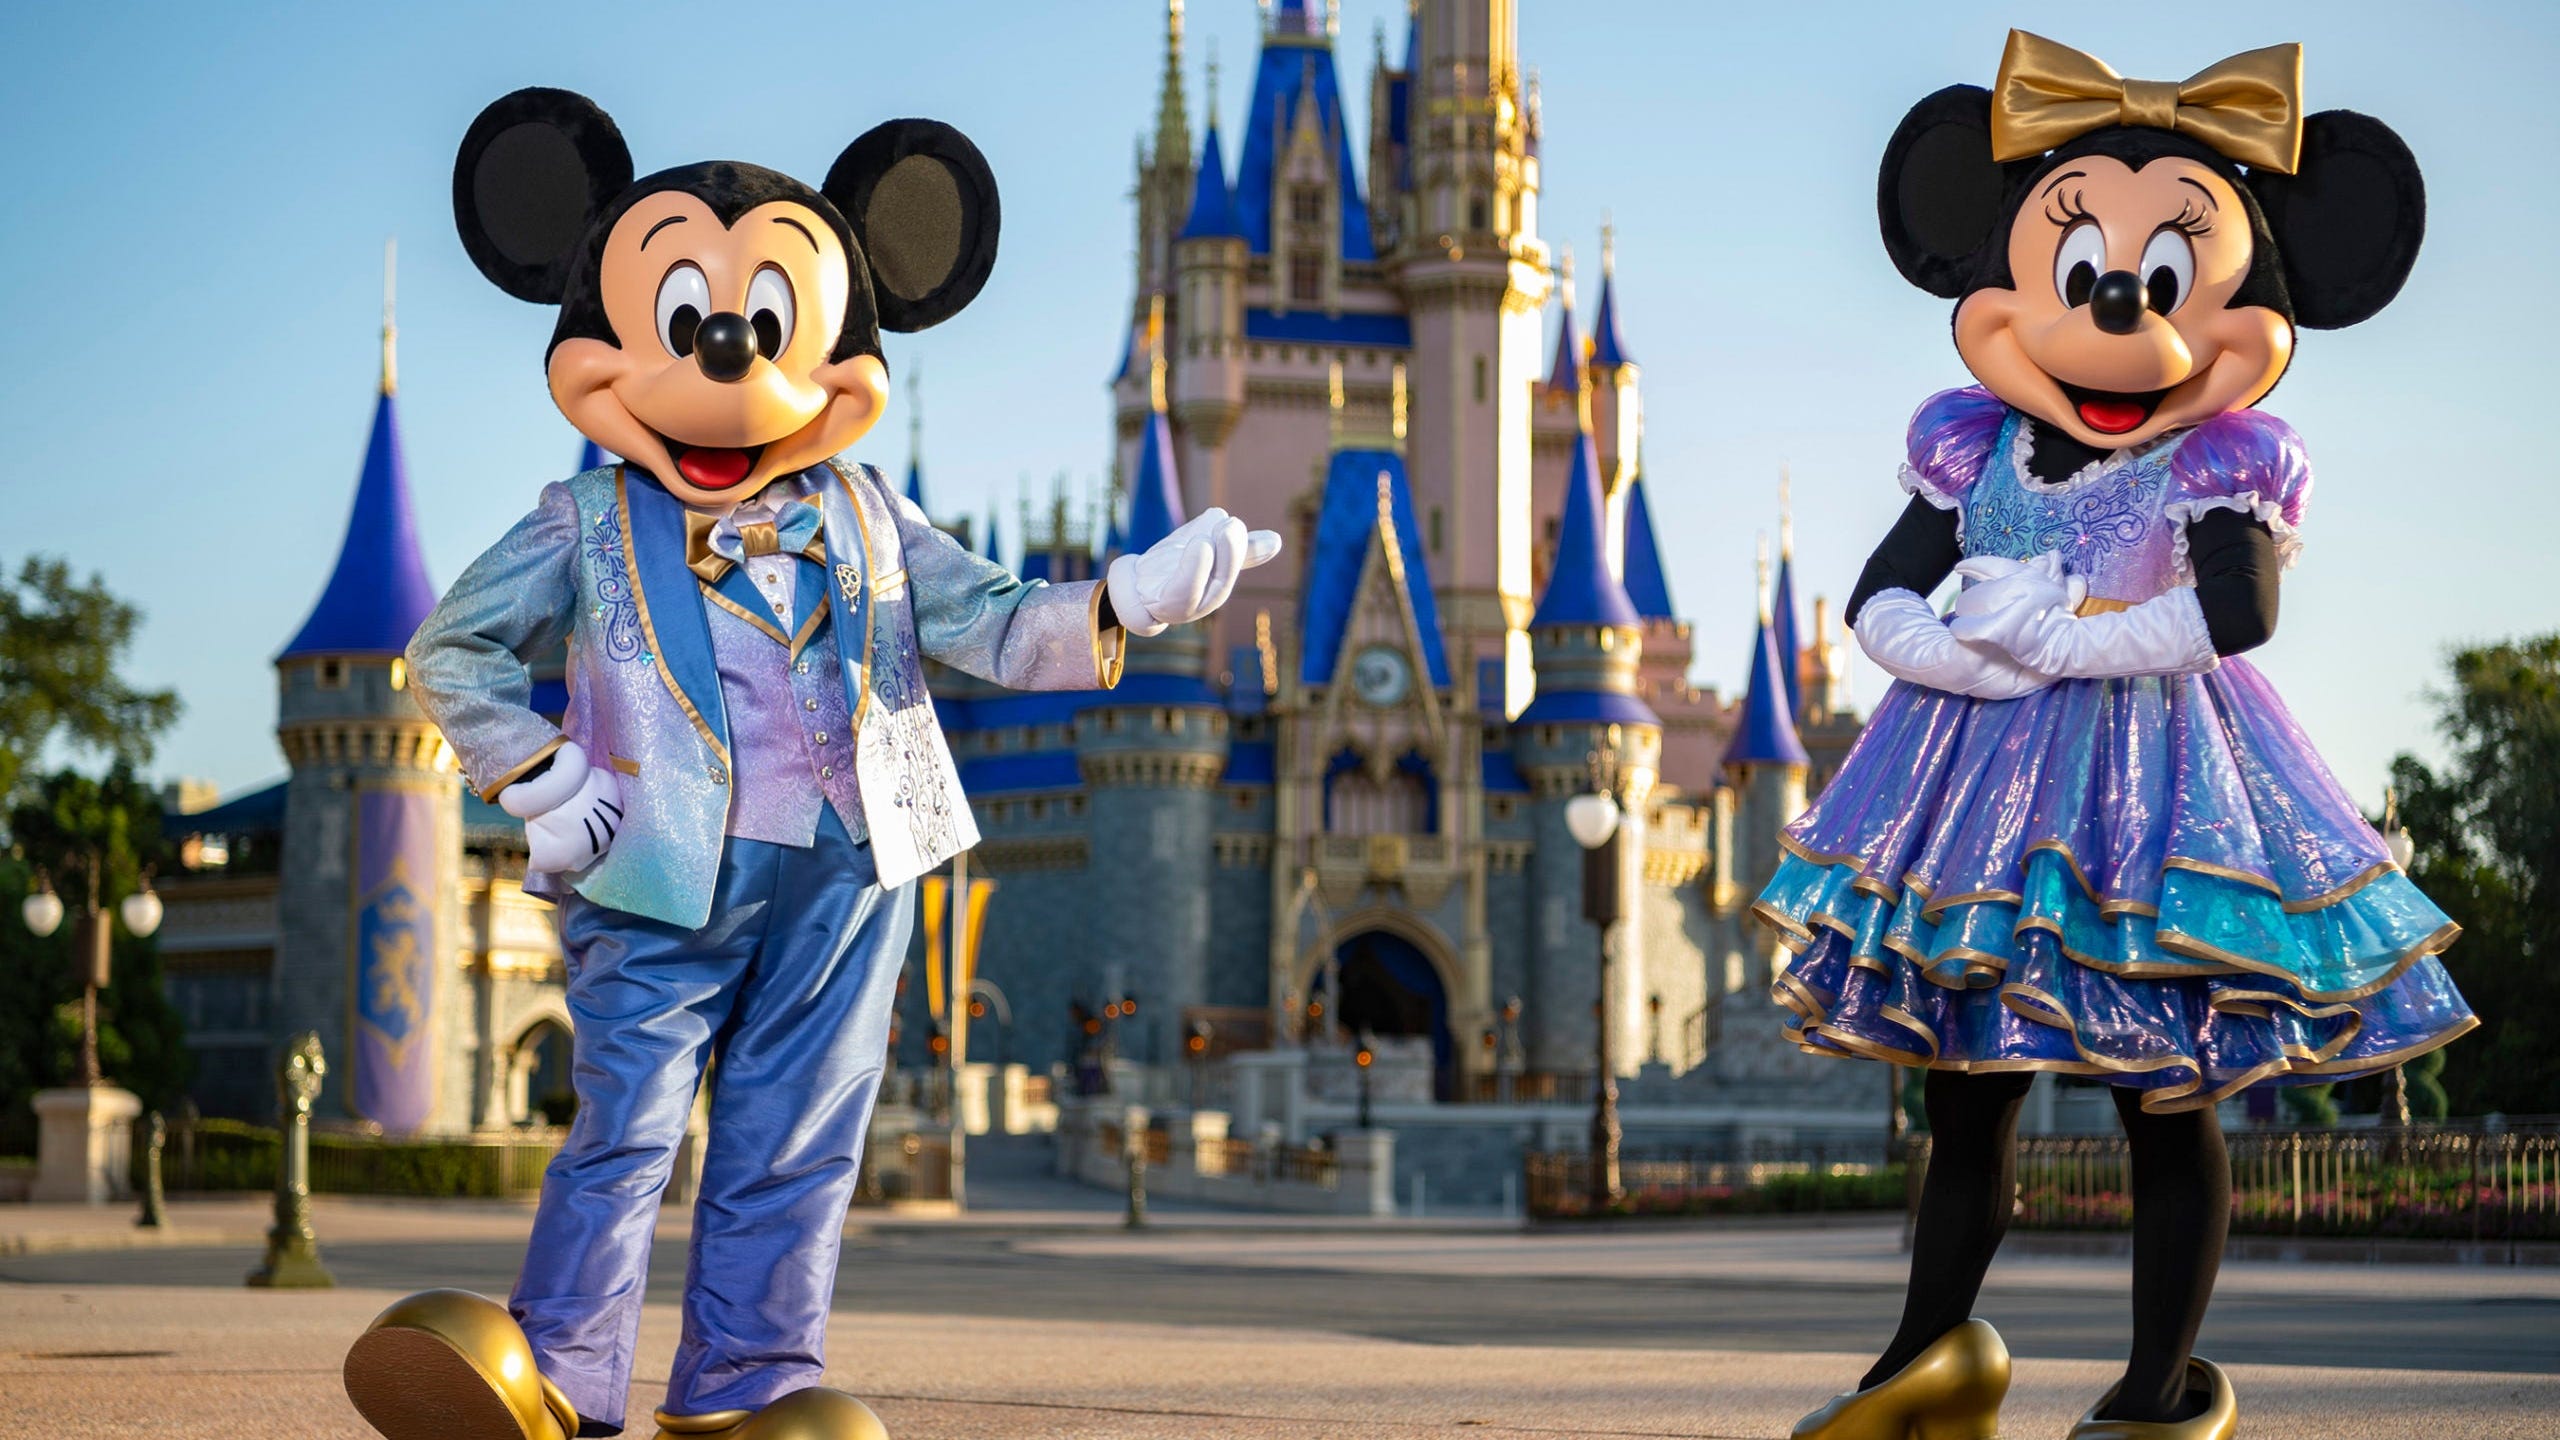 Walt Disney World relaxes COVID mask restrictions for outdoor photo